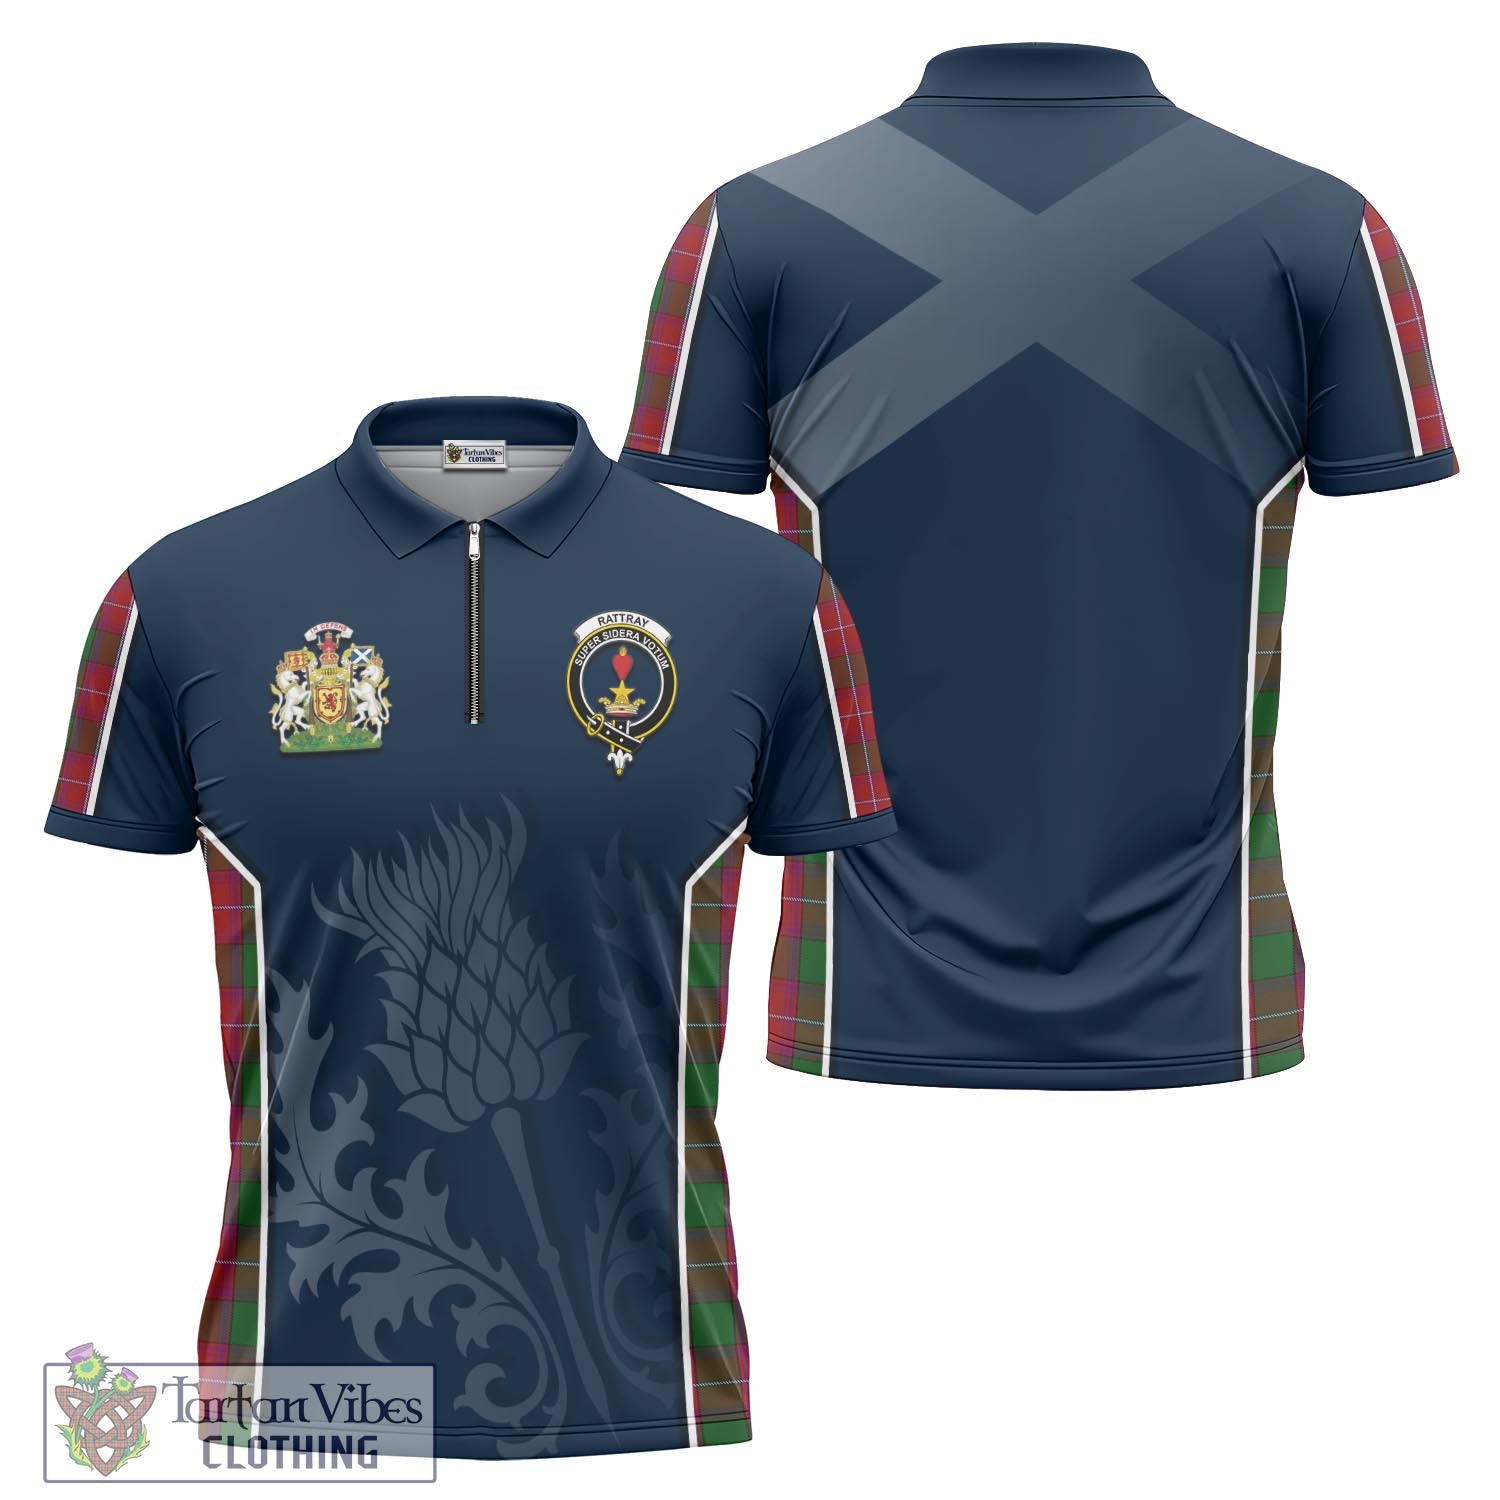 Tartan Vibes Clothing Rattray Tartan Zipper Polo Shirt with Family Crest and Scottish Thistle Vibes Sport Style